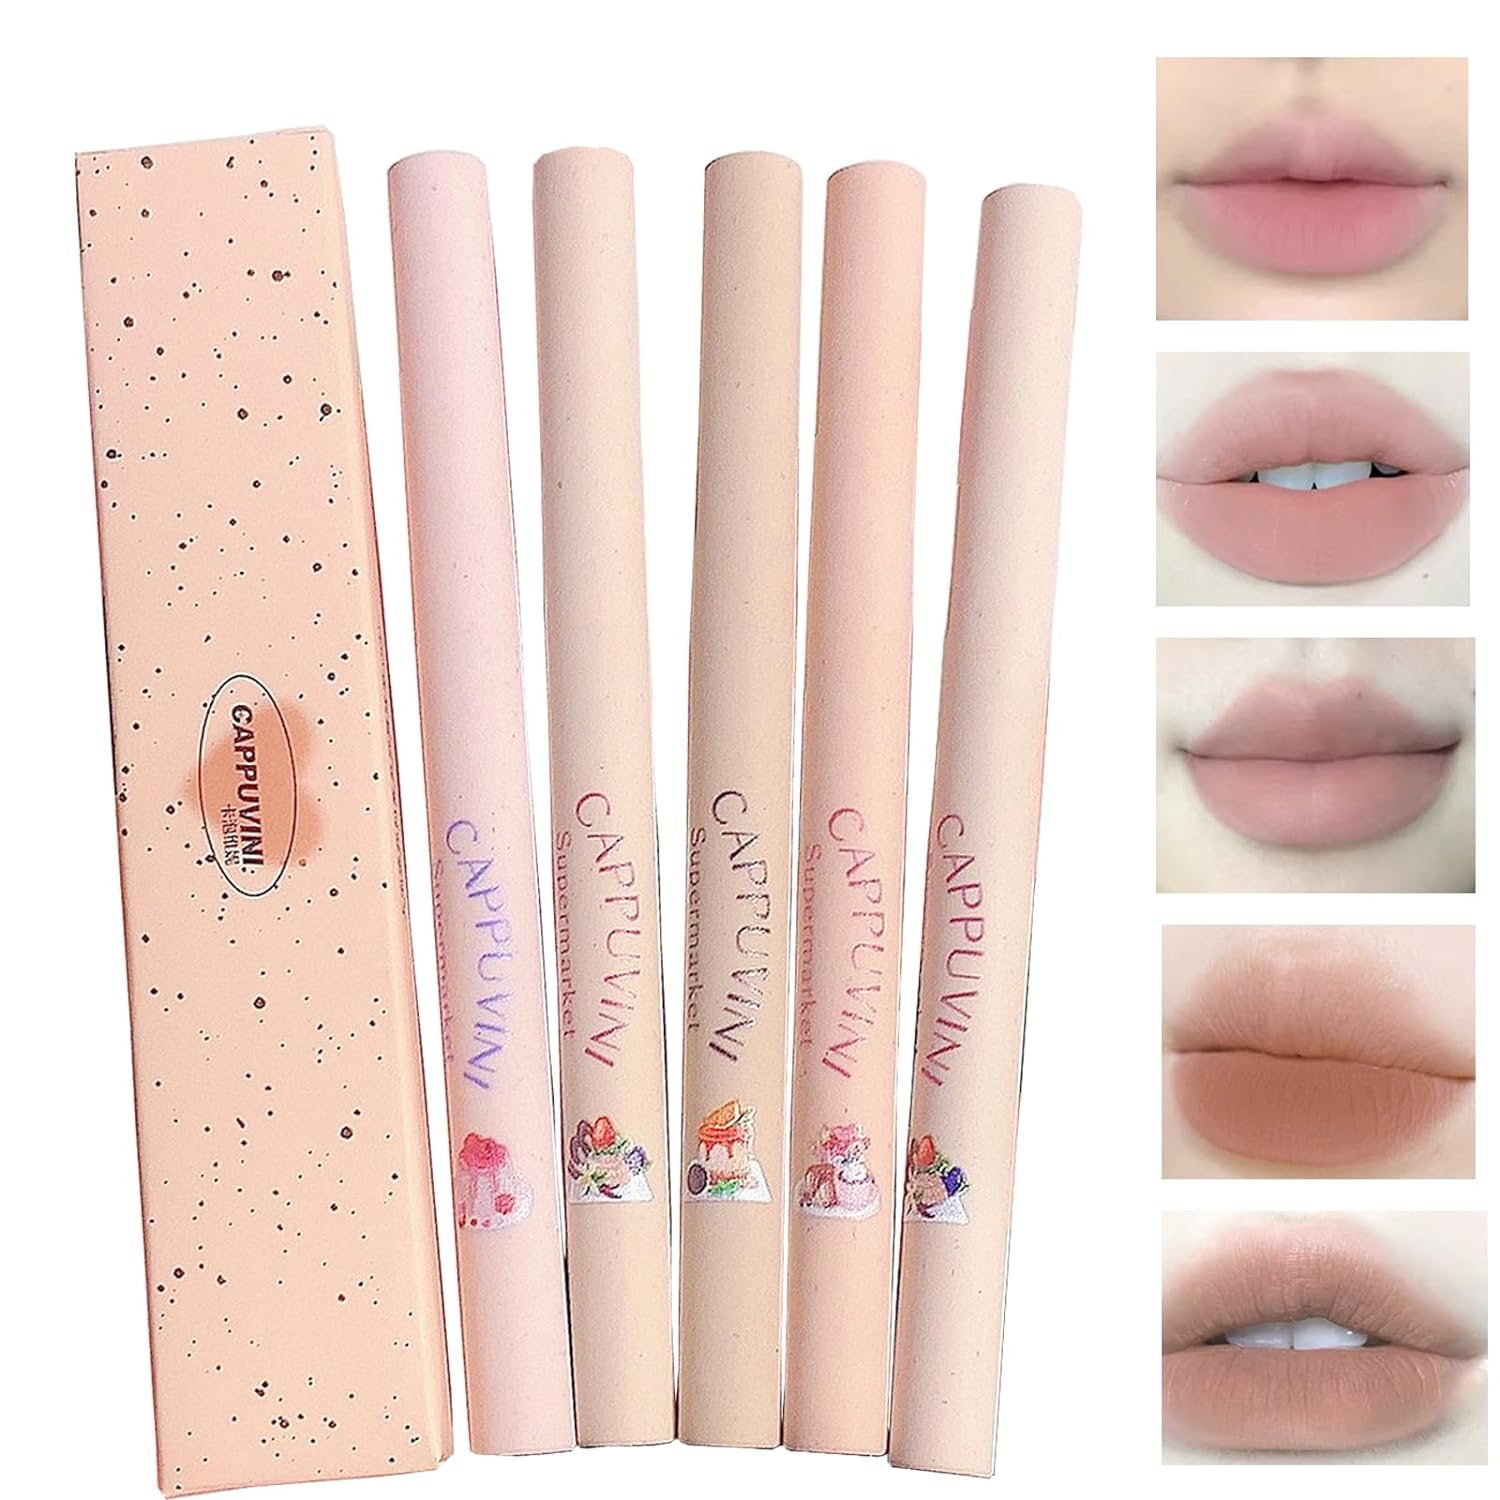 Domality 5 Colours Lip Liner Pen Set, 5 Pieces Nude Pink Lipstick Set, Durable Waterproof Creamy Lipstick with Matte Finish for Defines Perfect Lip Shape